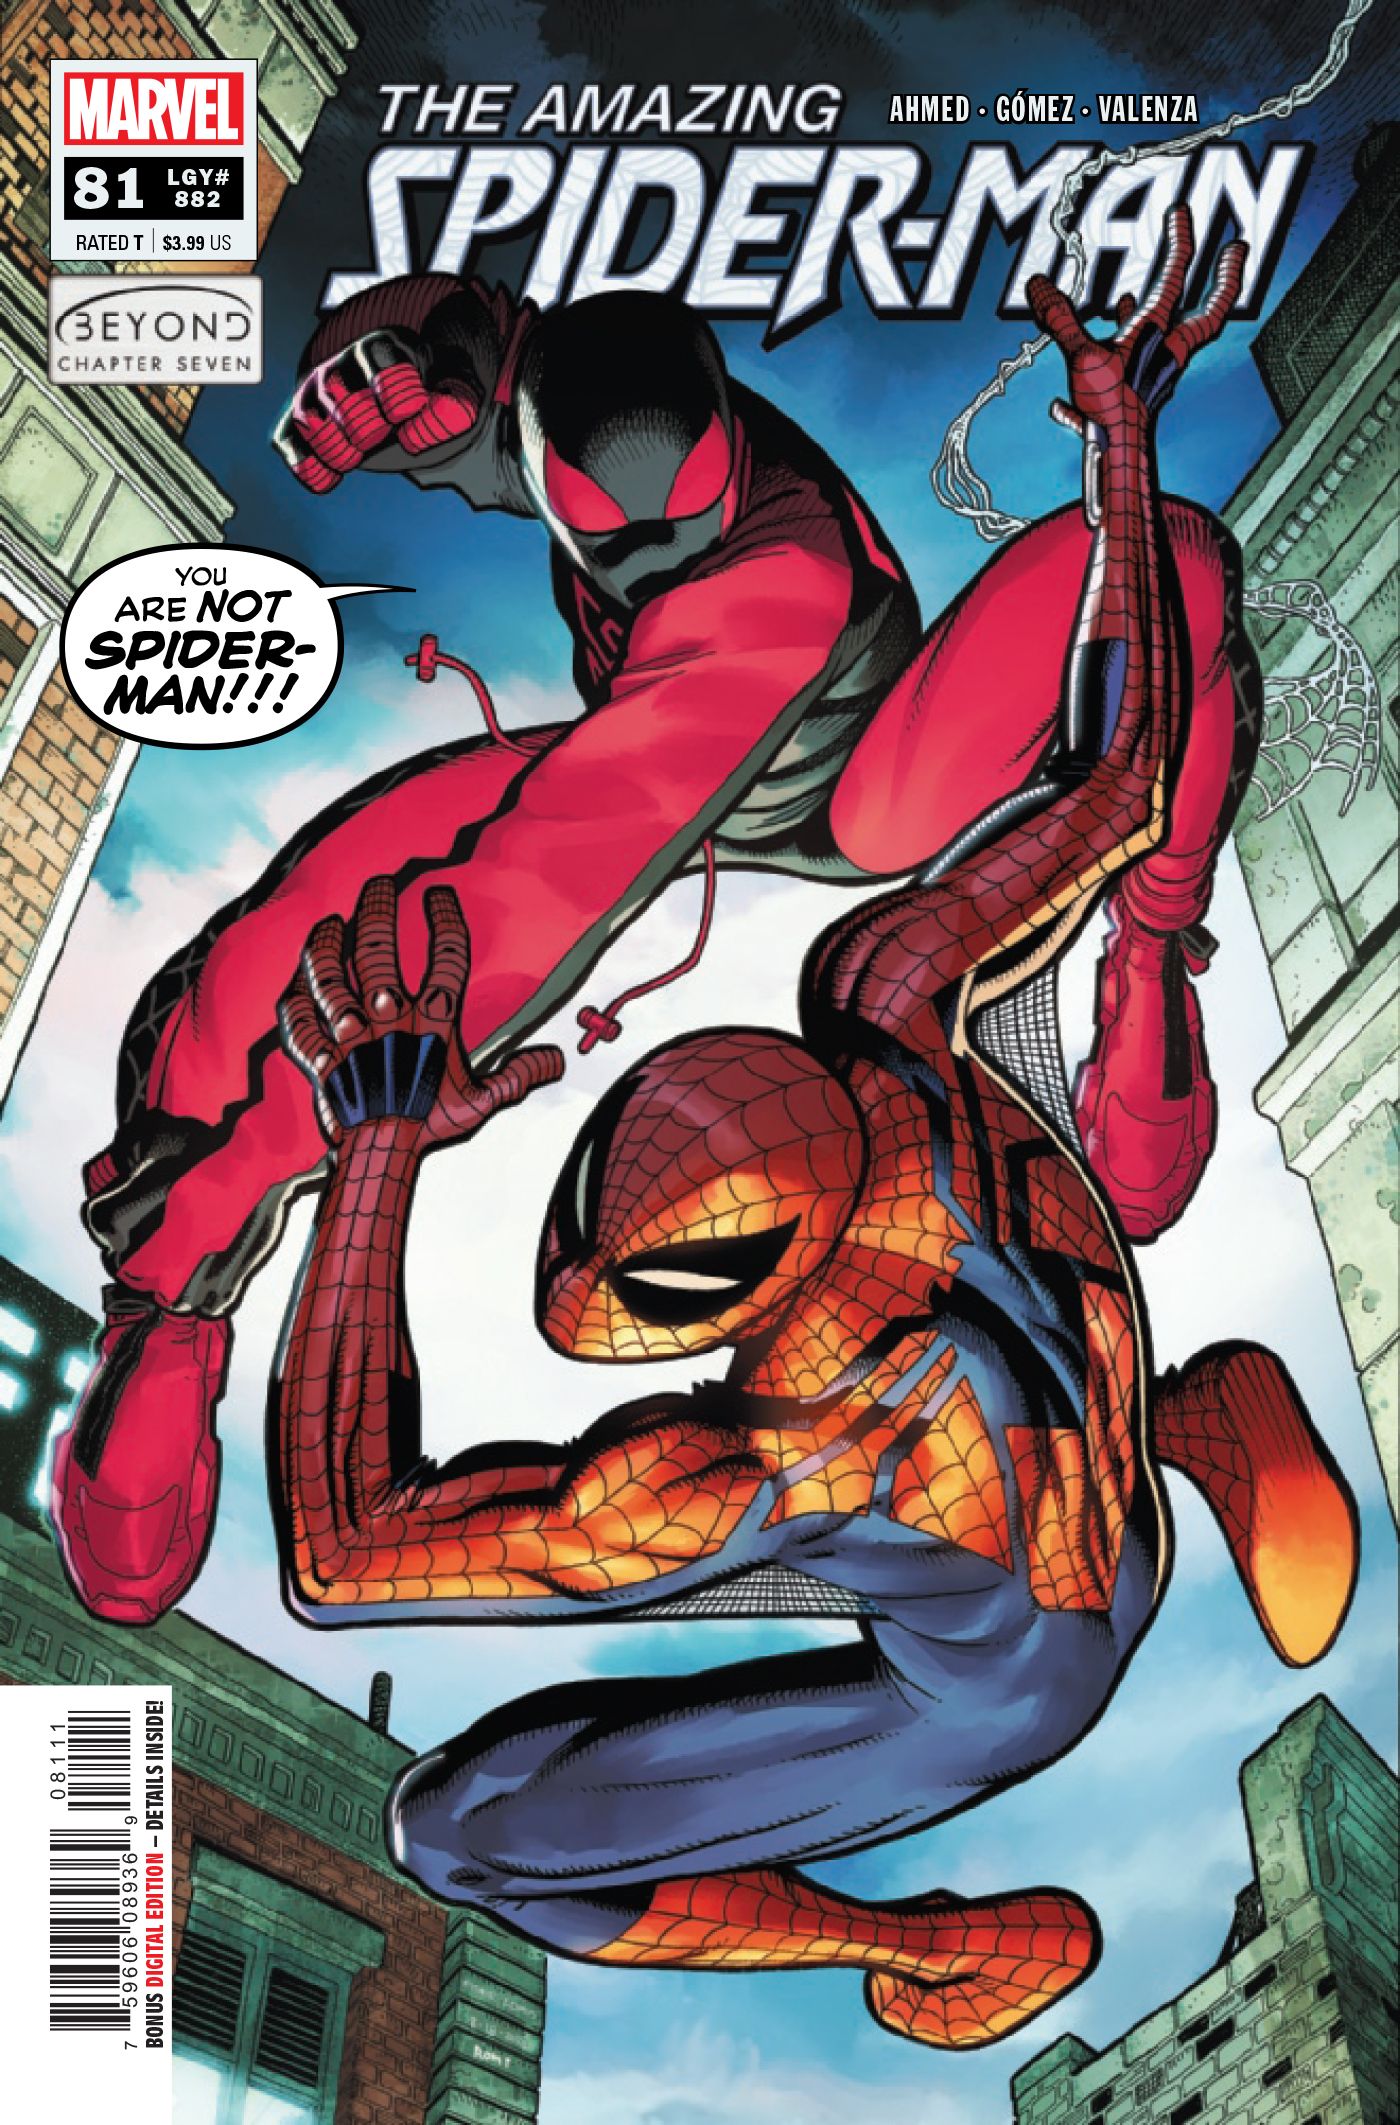 Ben Reilly and Miles Morales face off on the cover of The Amazing Spider-Man #81.